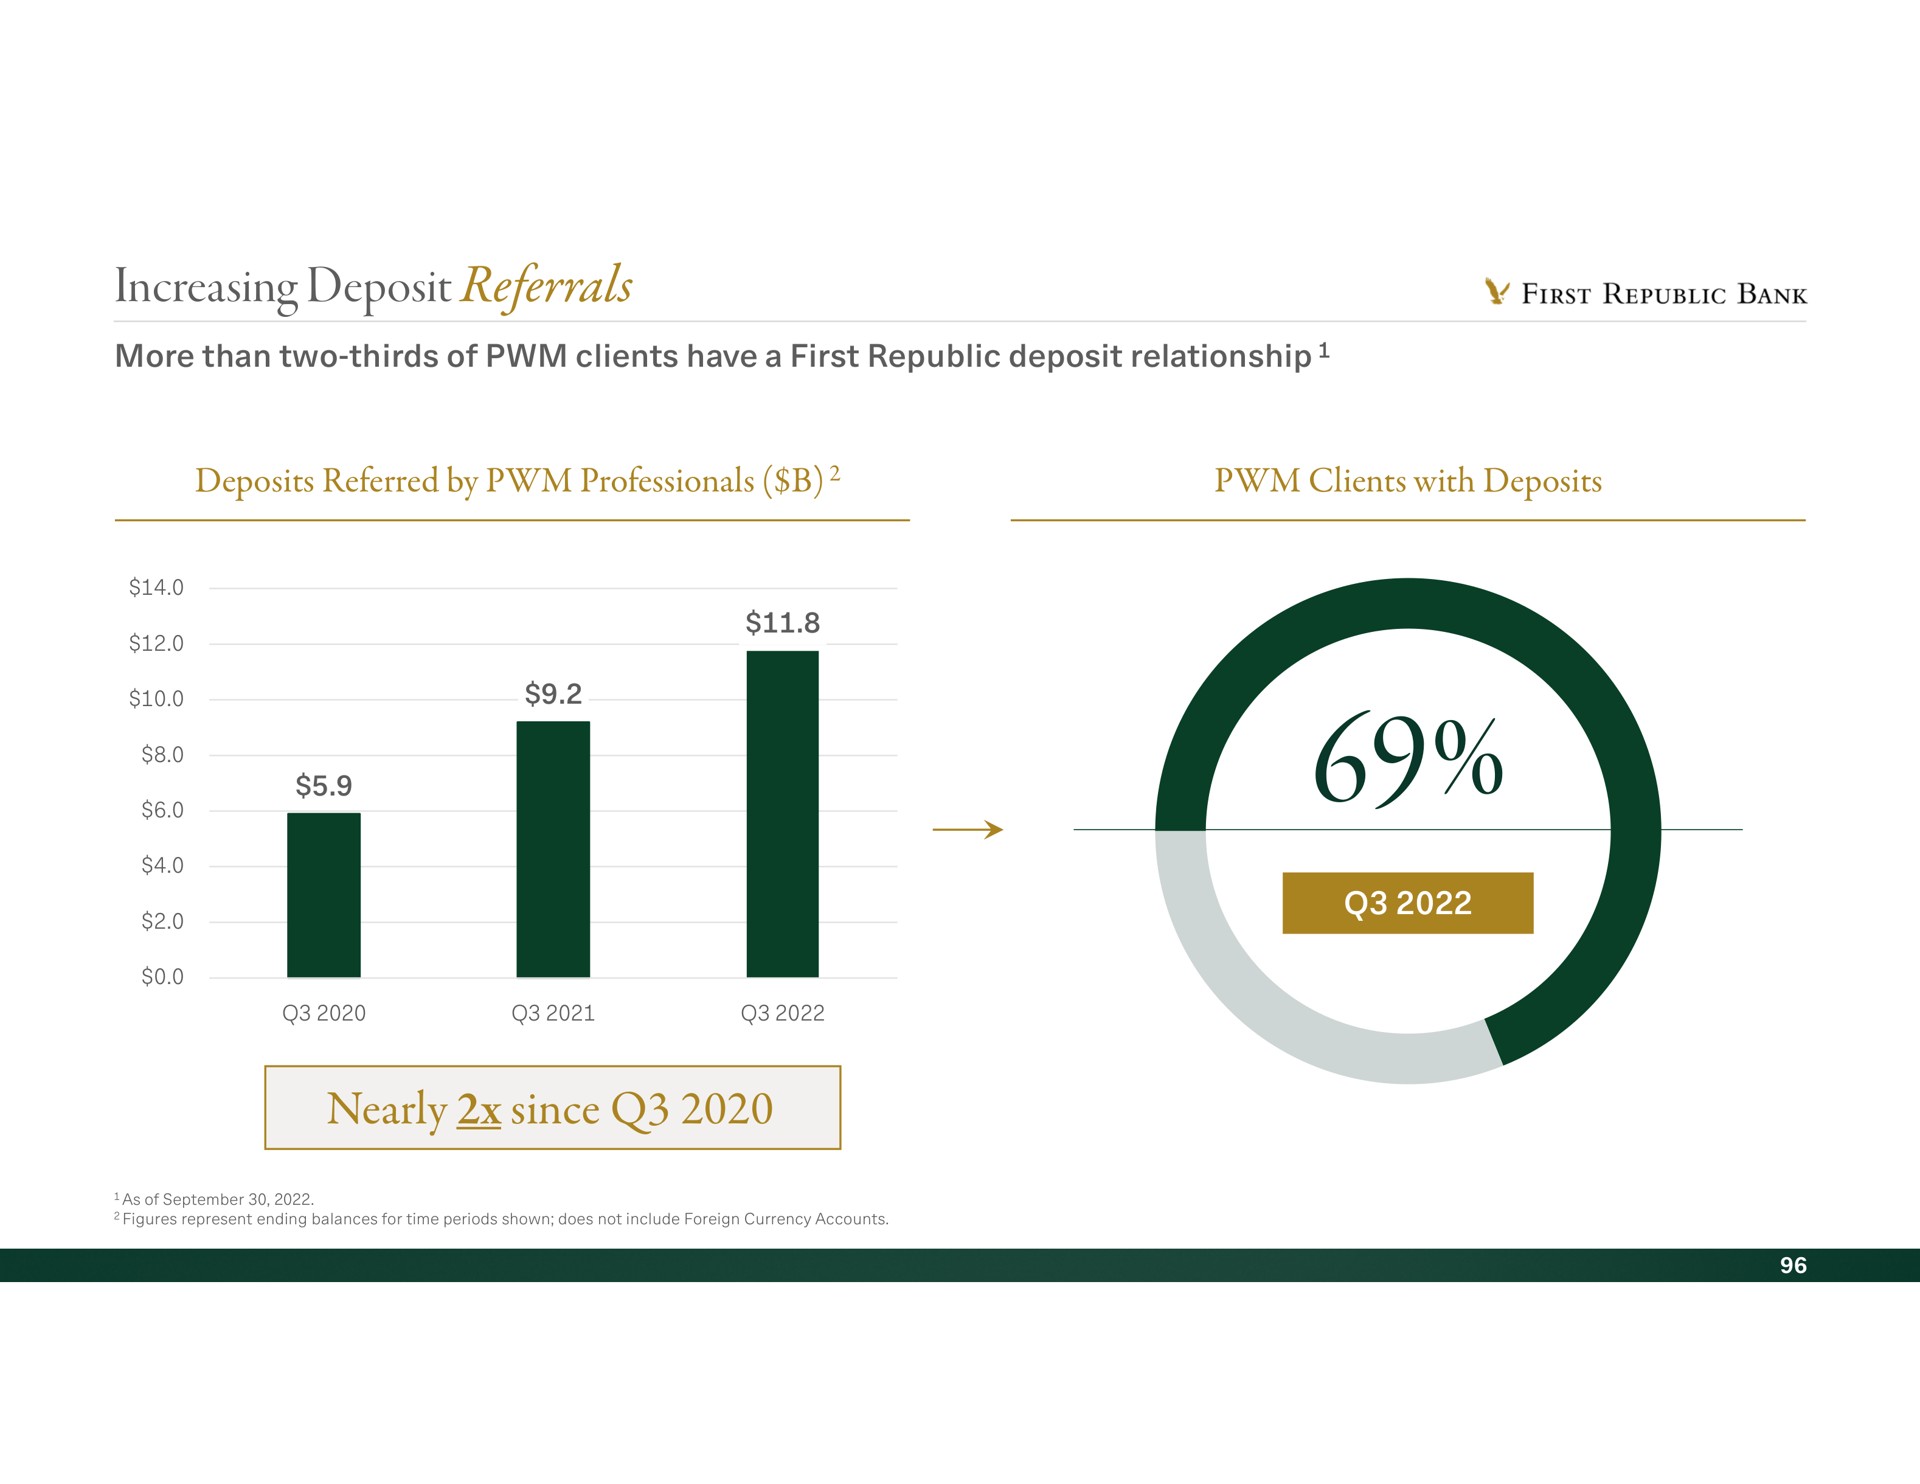 increasing deposit referrals nearly since first republic bank deposits referred by professionals clients with deposits | First Republic Bank